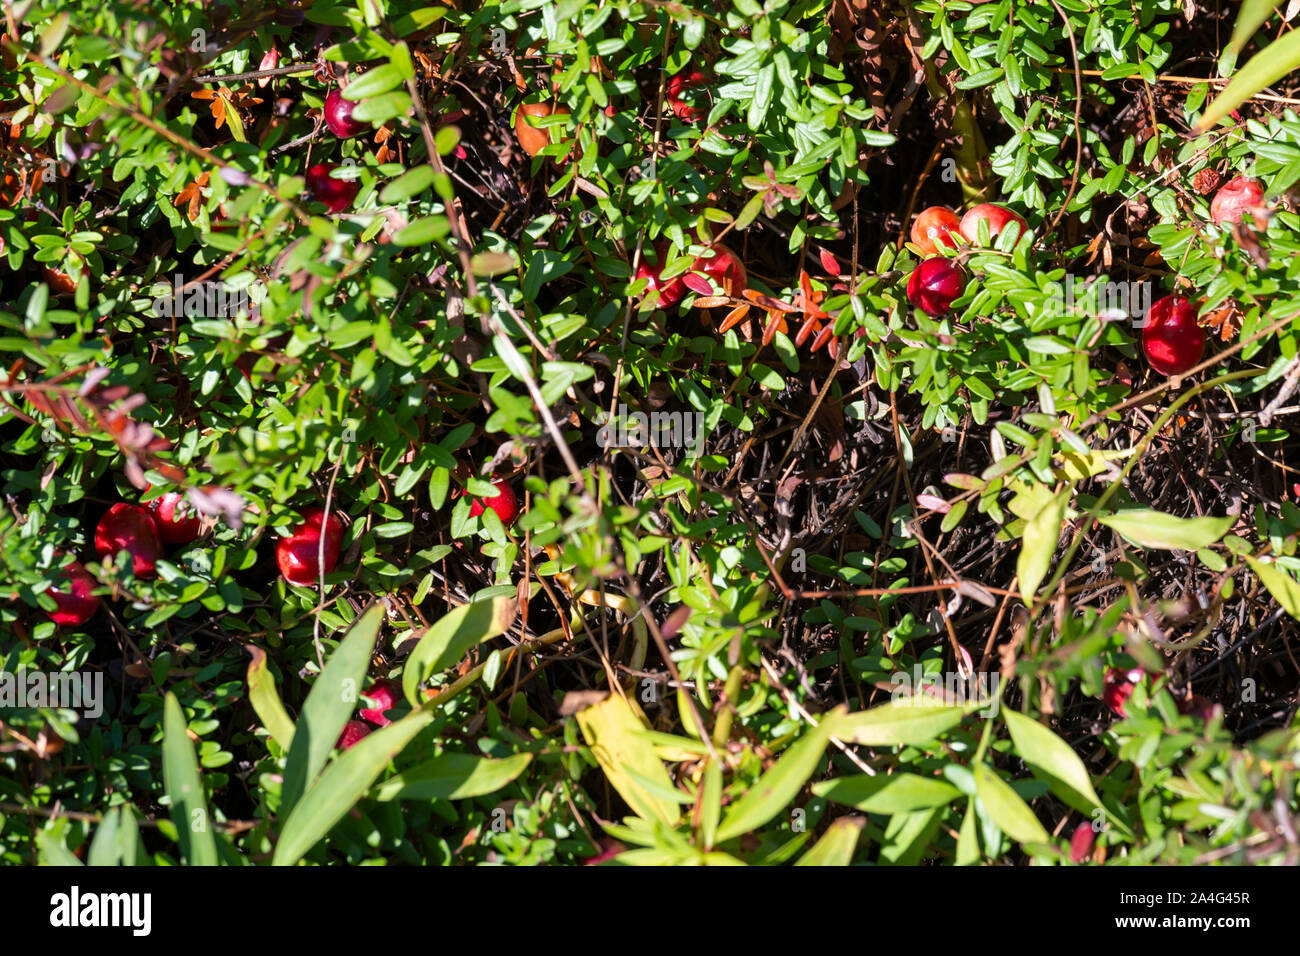 South Haven, Michigan - Cranberries growing at DeGRandchamp Farms. When the berries are ripe, the cranberry bog will be flooded and the floating fruit Stock Photo